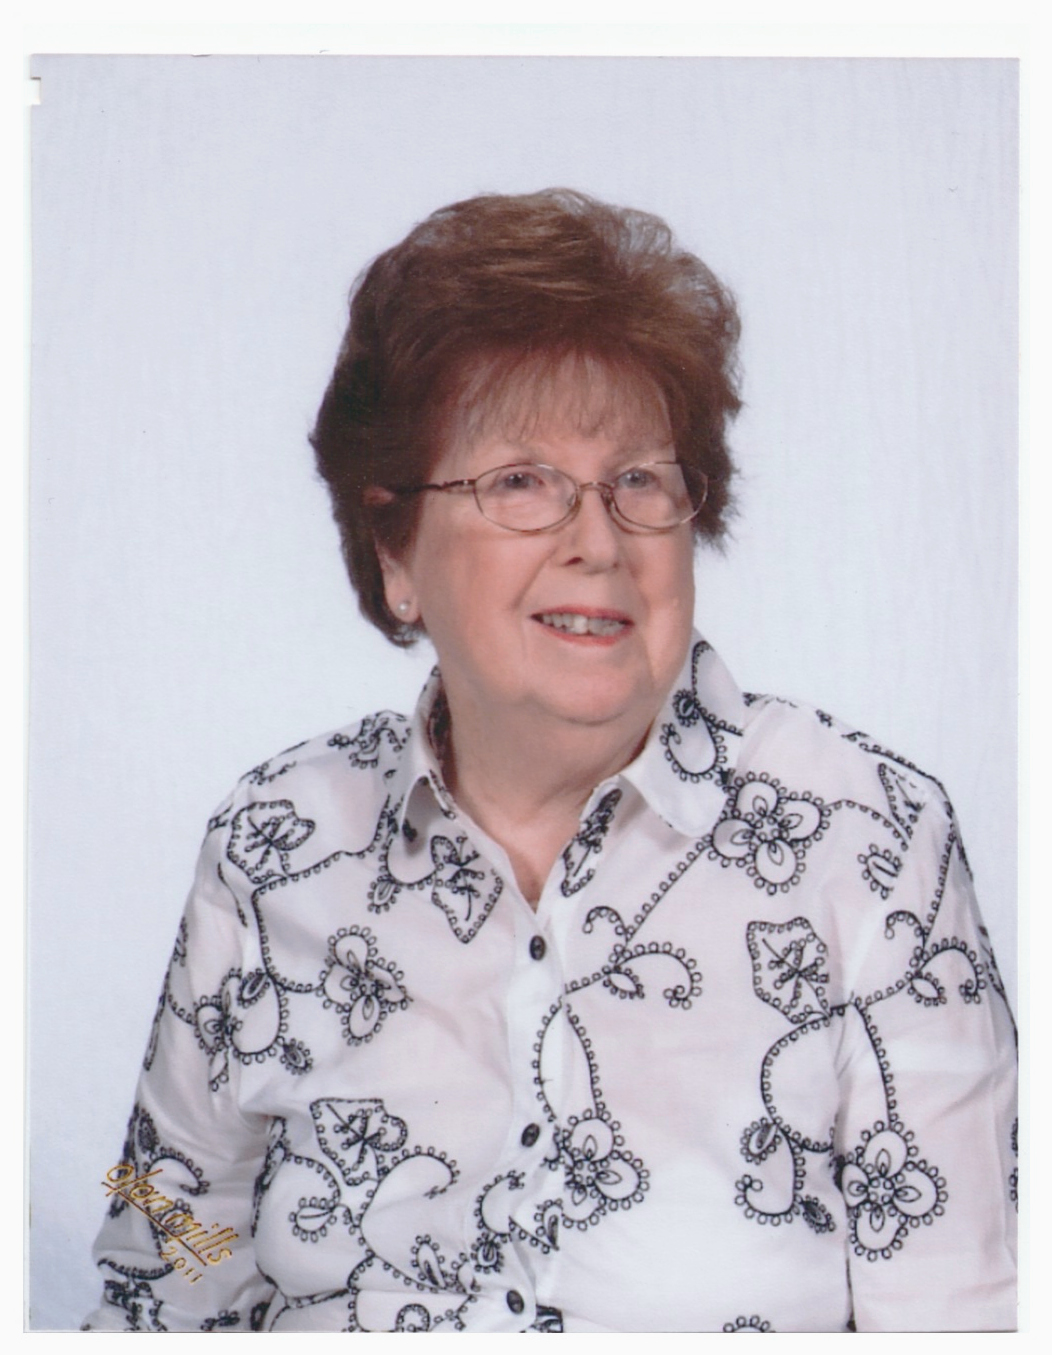 http://www.croswellfuneralhome.com/Pictures/Scan_20151031_161901%20Mildred%20Schofield%20pic.jpg